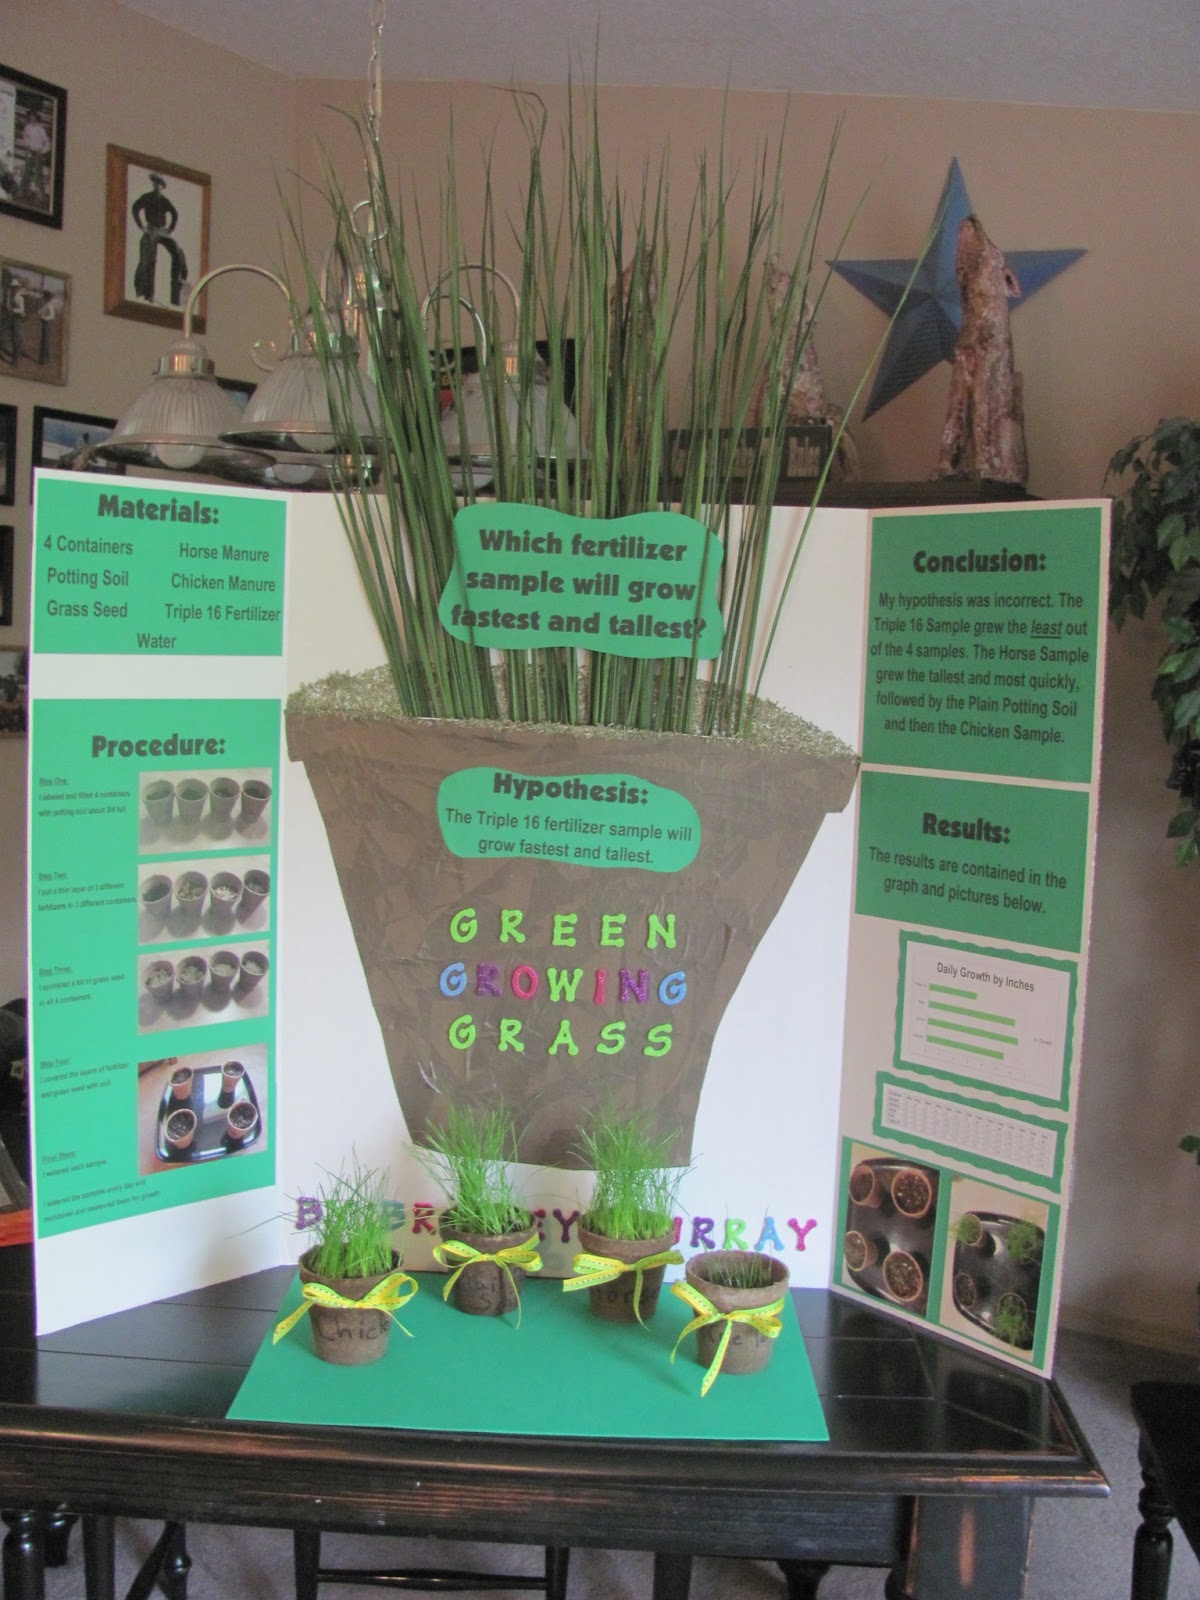 Life and Times of the 4 B's: Brailey's Fifth Grade Science Fair Project